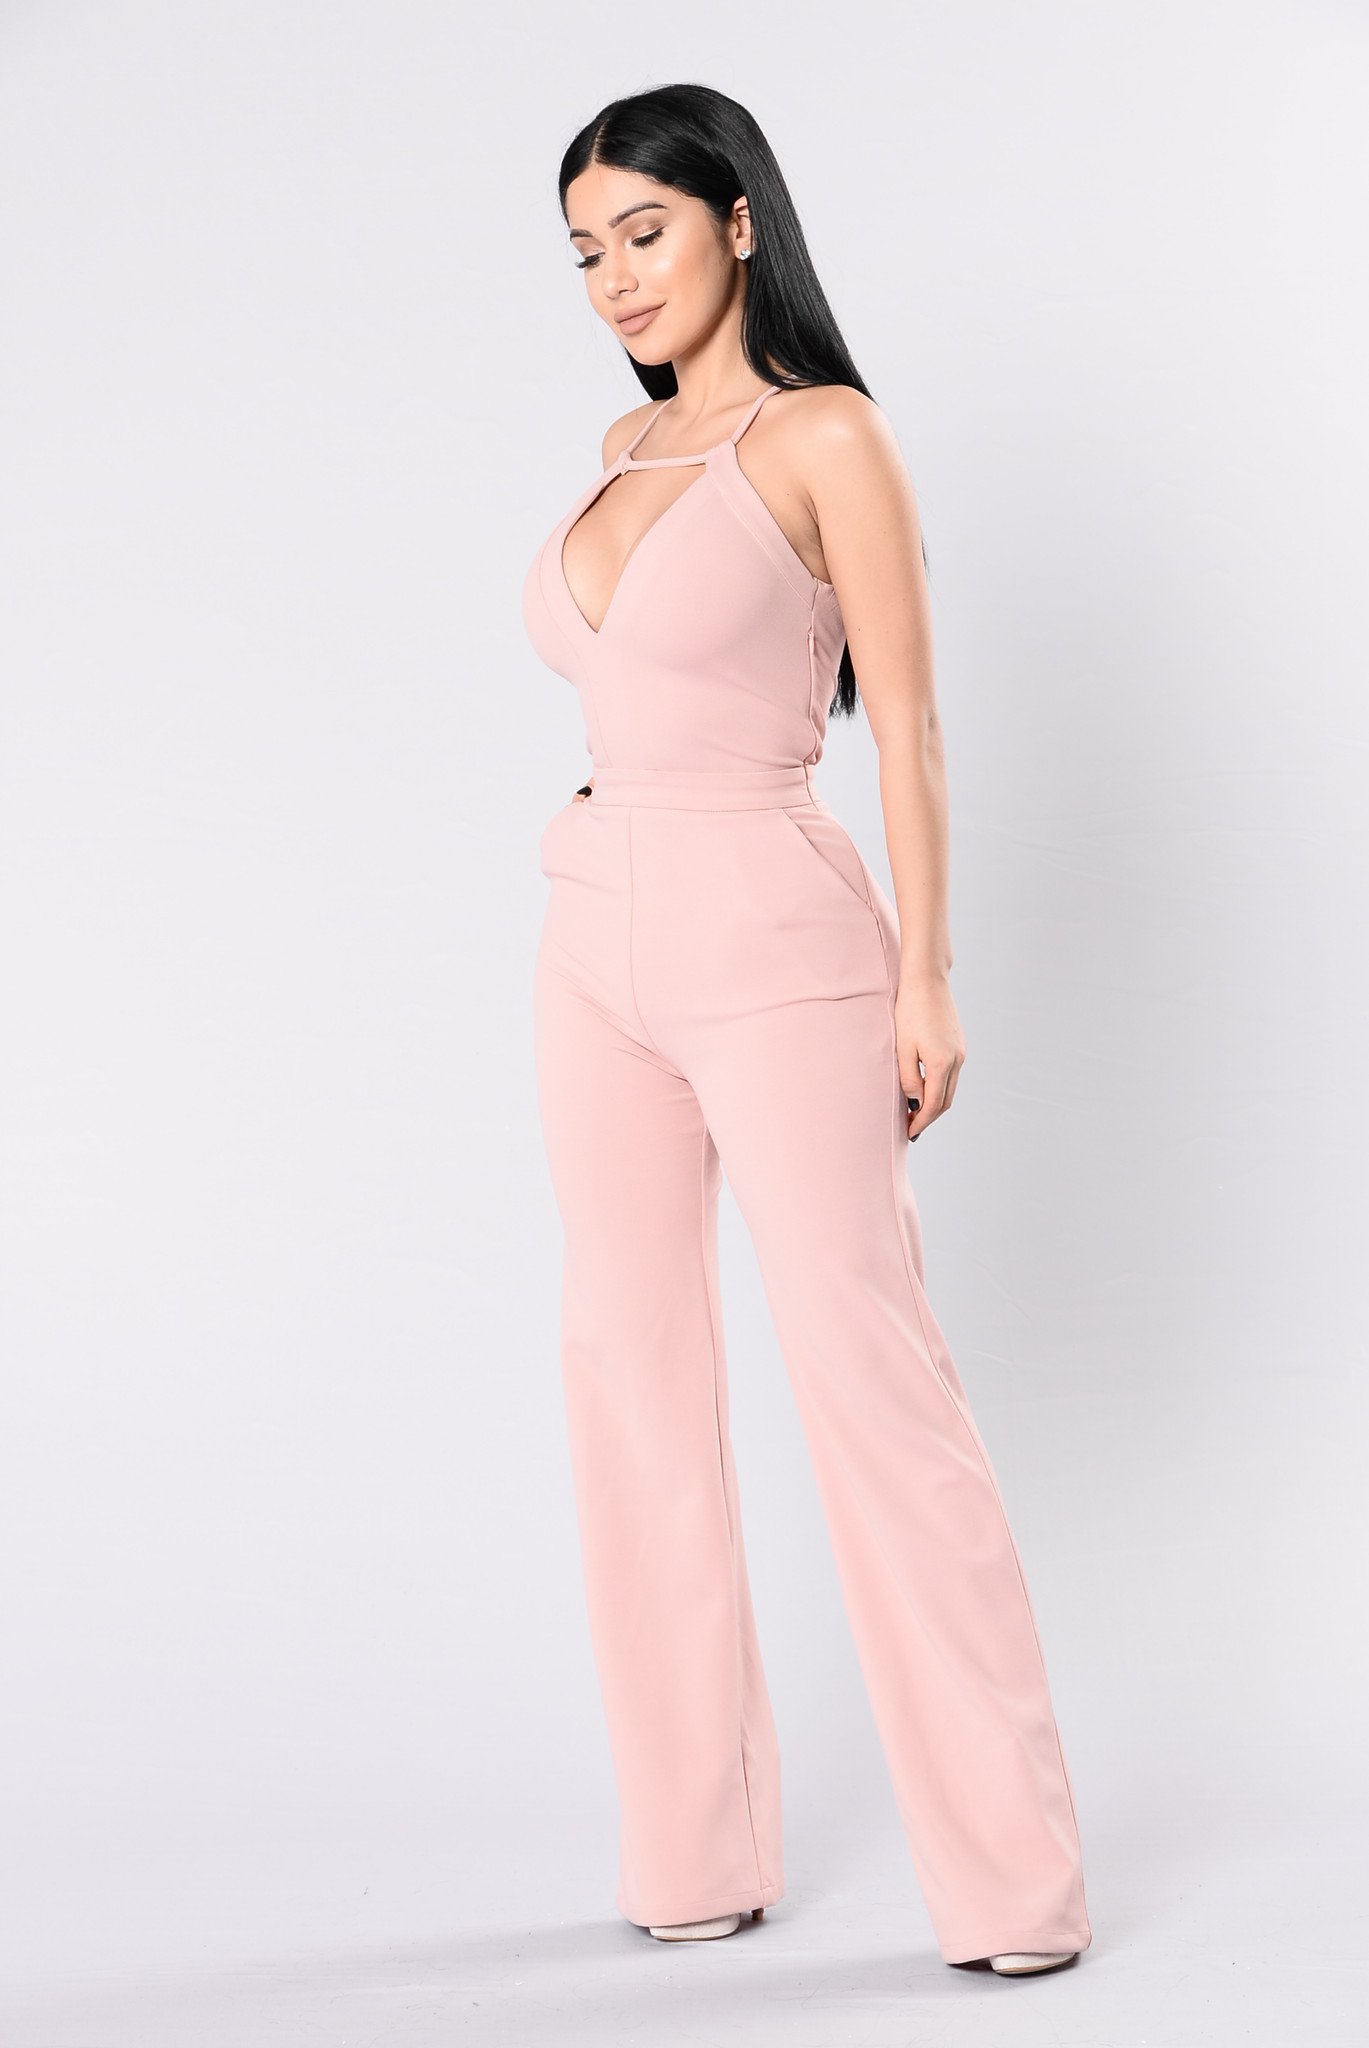 The childlike look in a pink jumpsuit